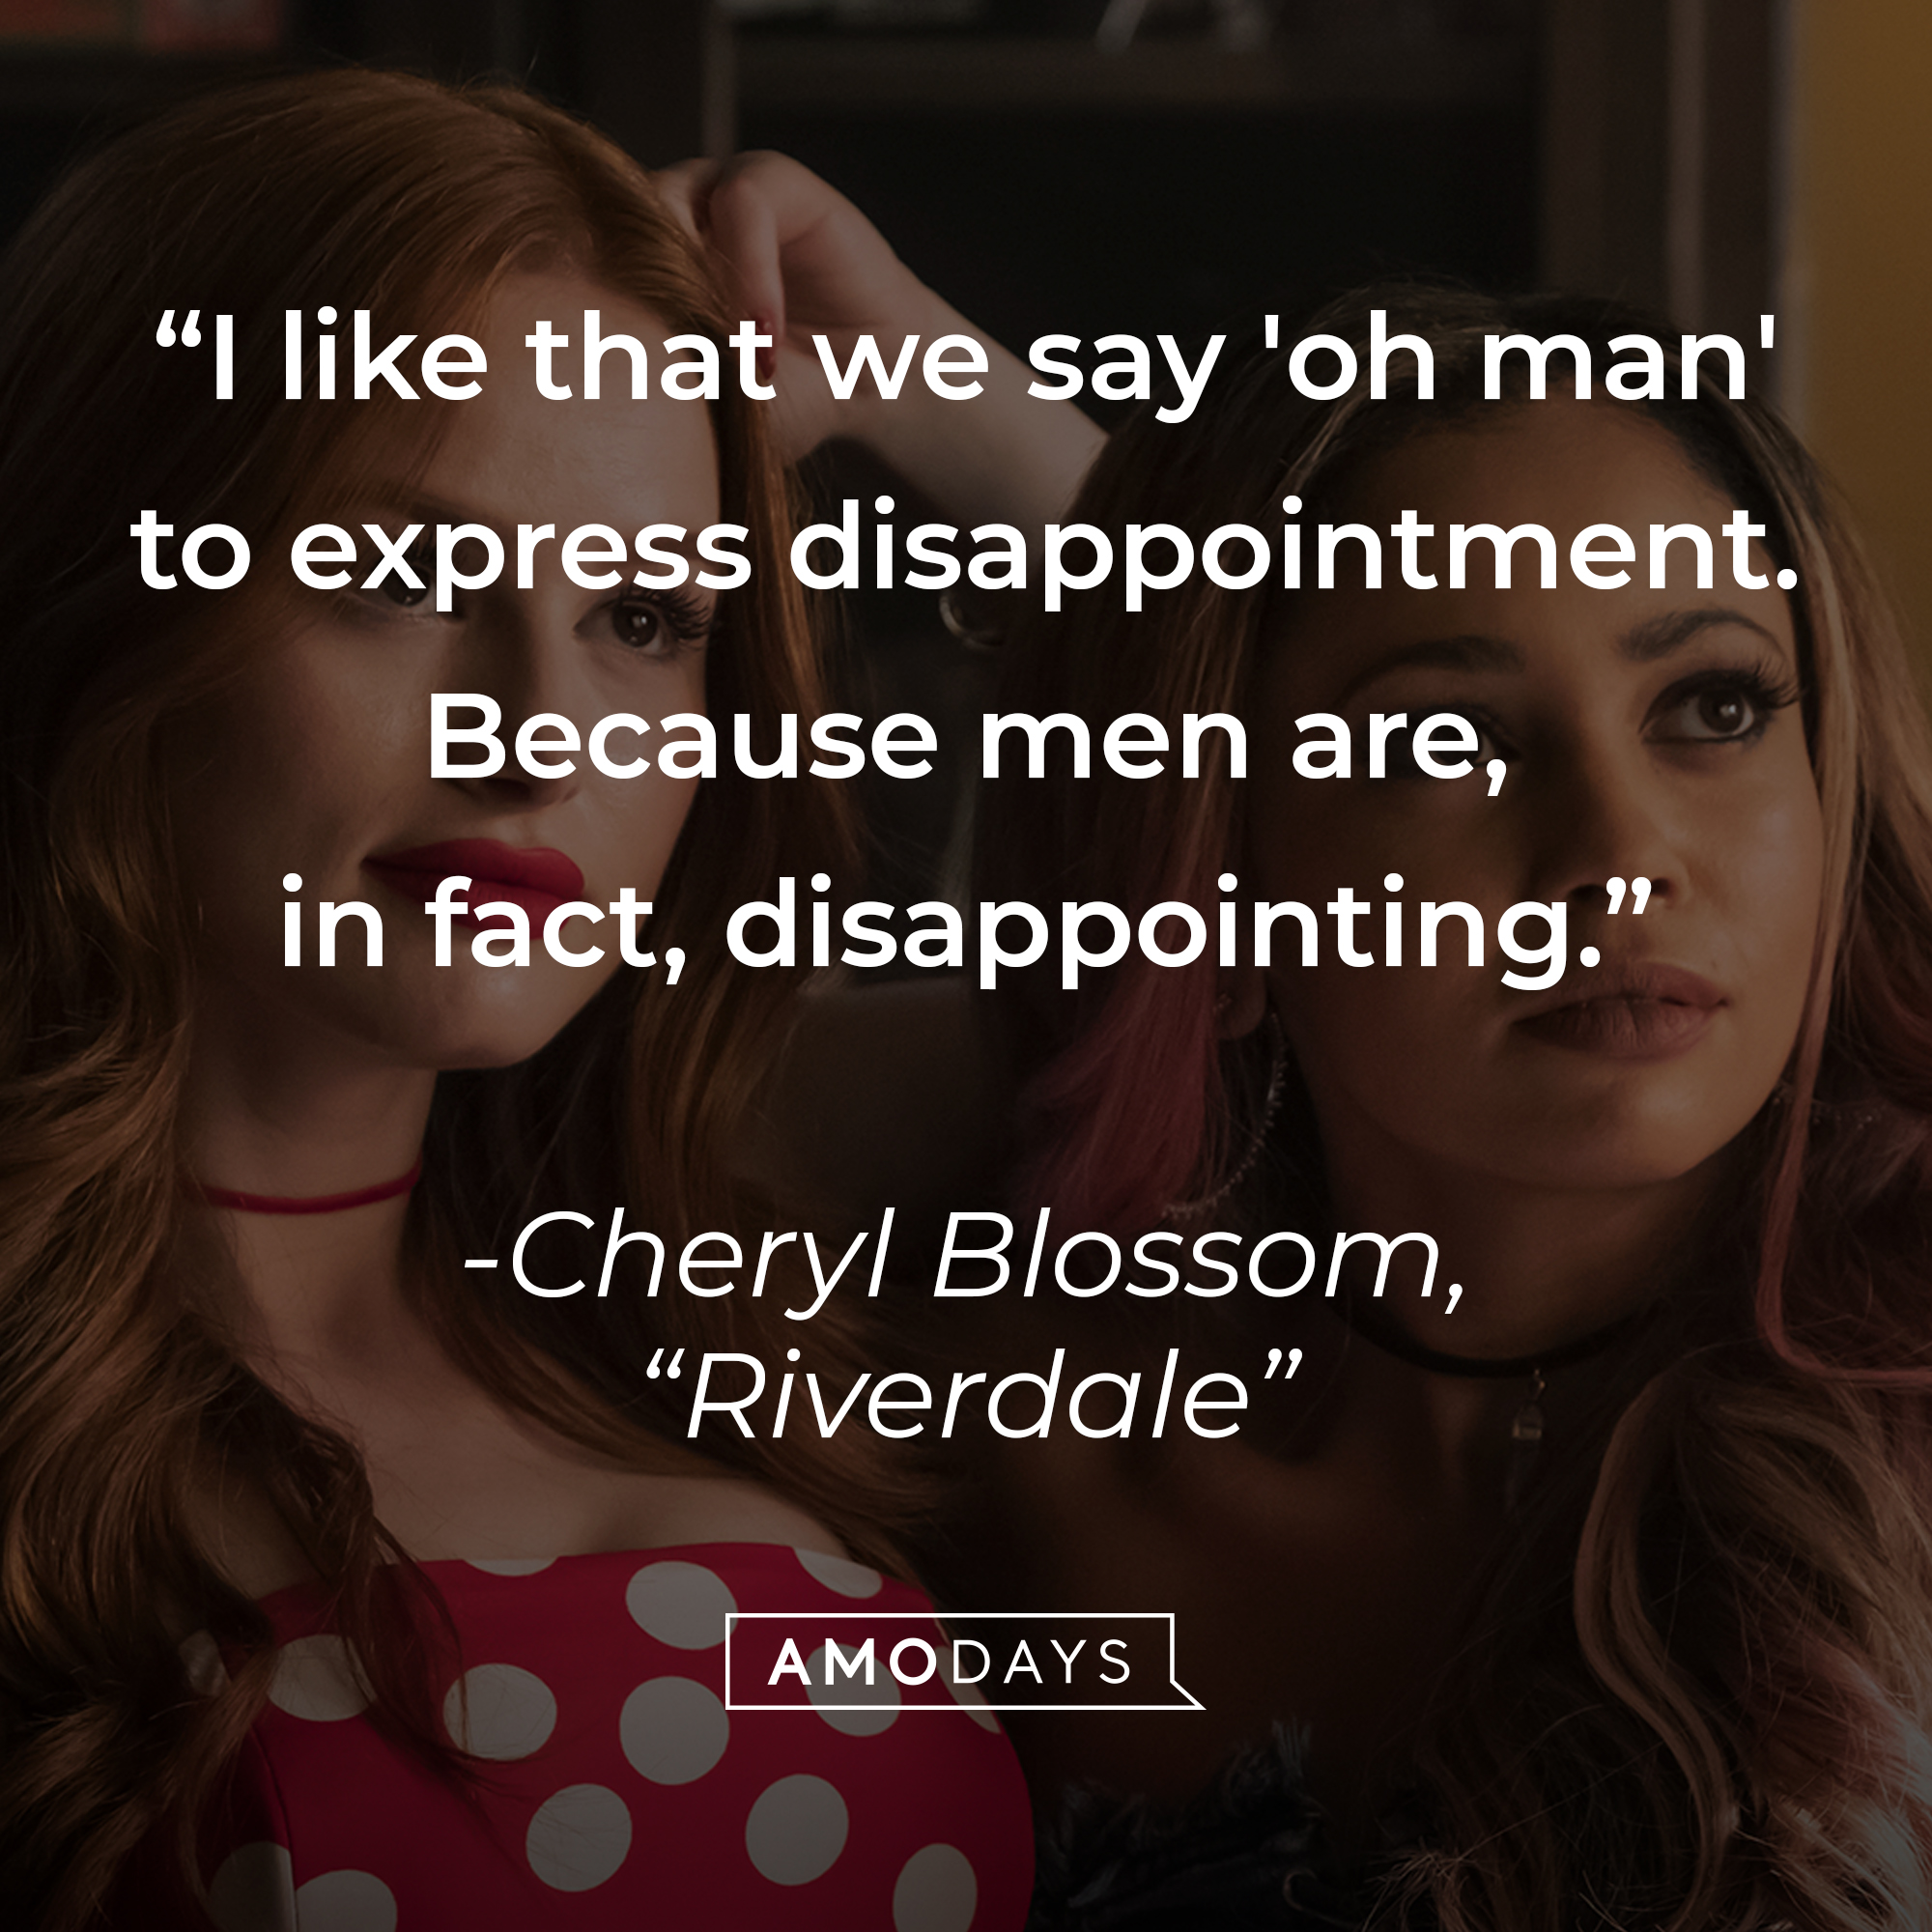 Cheryl Blossom with her quote: "I like that we say 'oh man' to express disappointment. Because men are, in fact, disappointing." | Source: Facebook.com/CWRiverdale